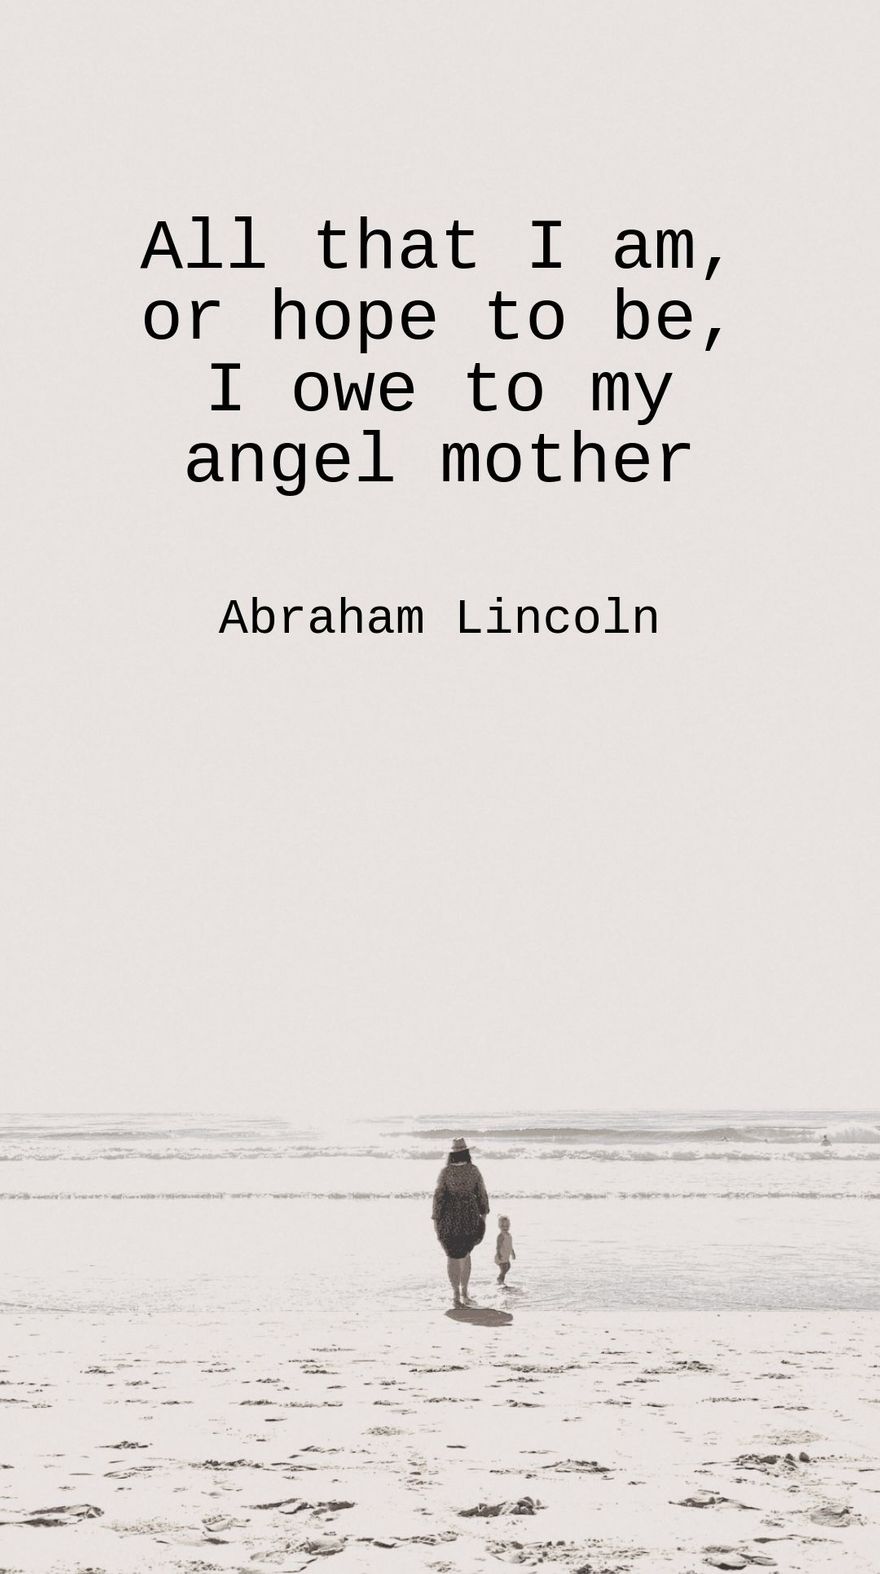 Abraham Lincoln - All that I am, or hope to be, I owe to my angel mother. 